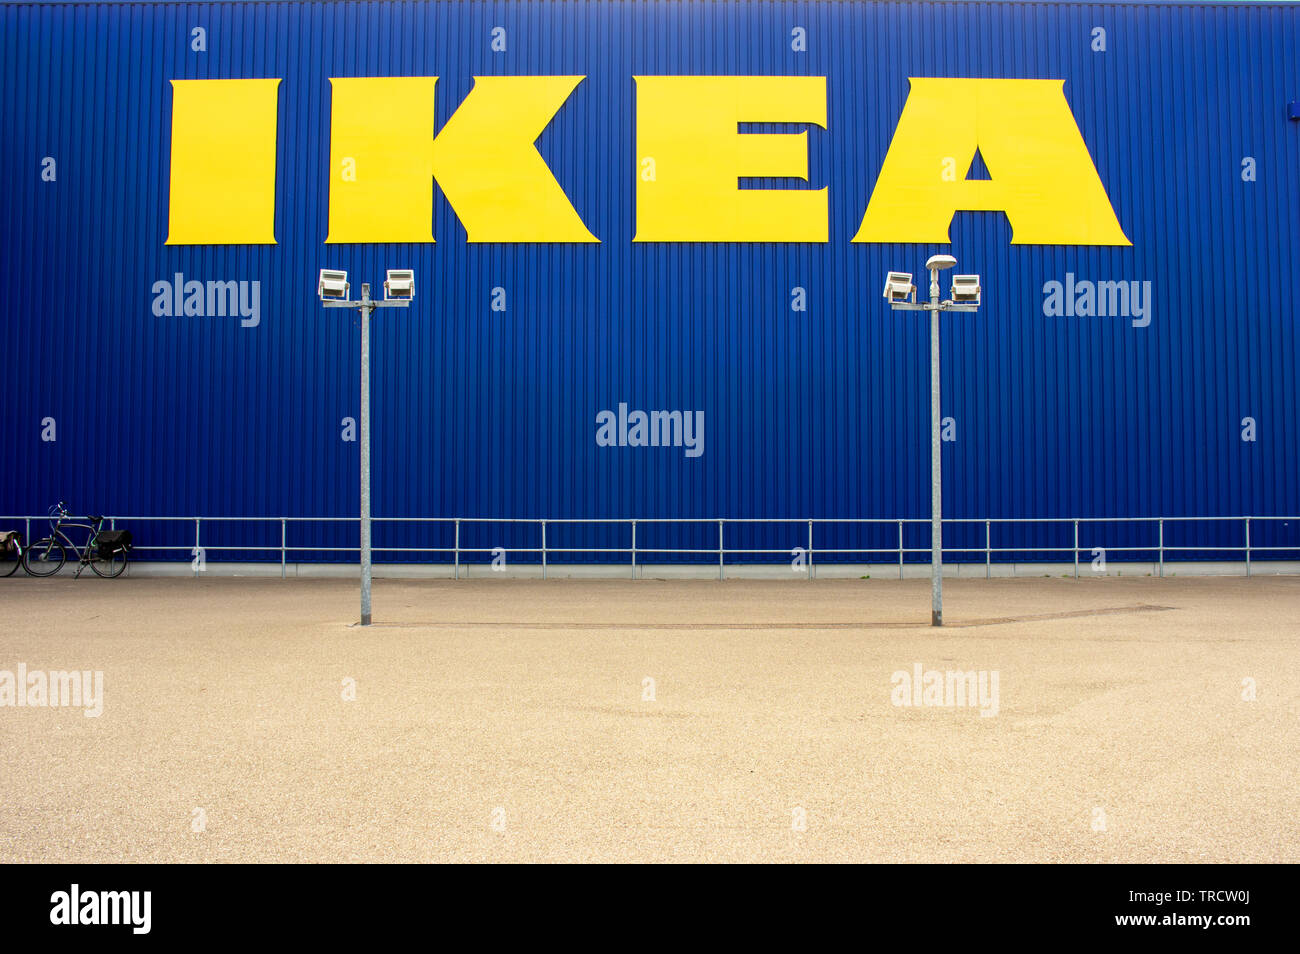 Duiven Netherlands May 24 2019 Wall Of A Ikea Store With Two